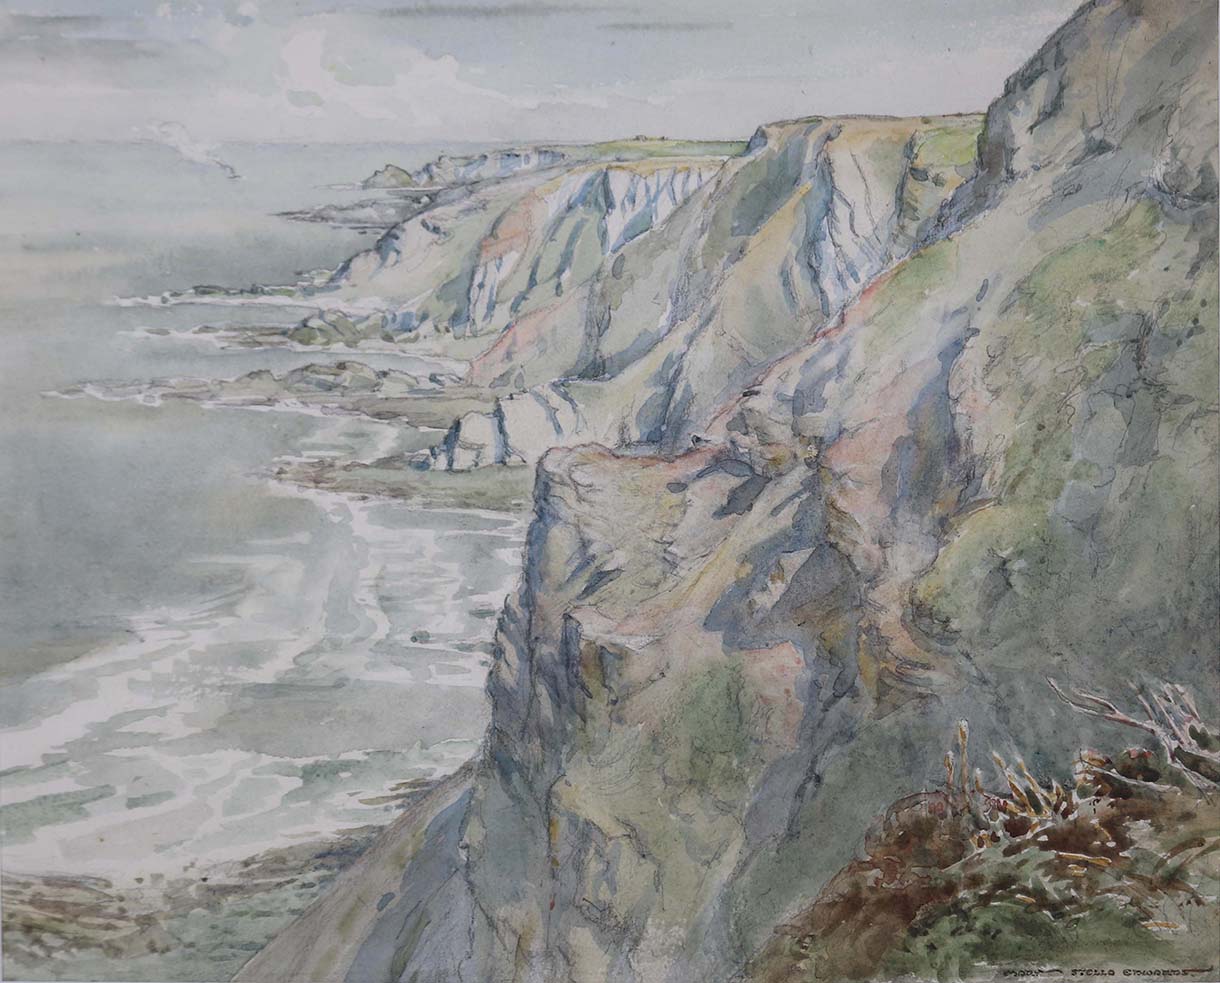 Watercolour of the shoreline and cliffs by Judith Ackland